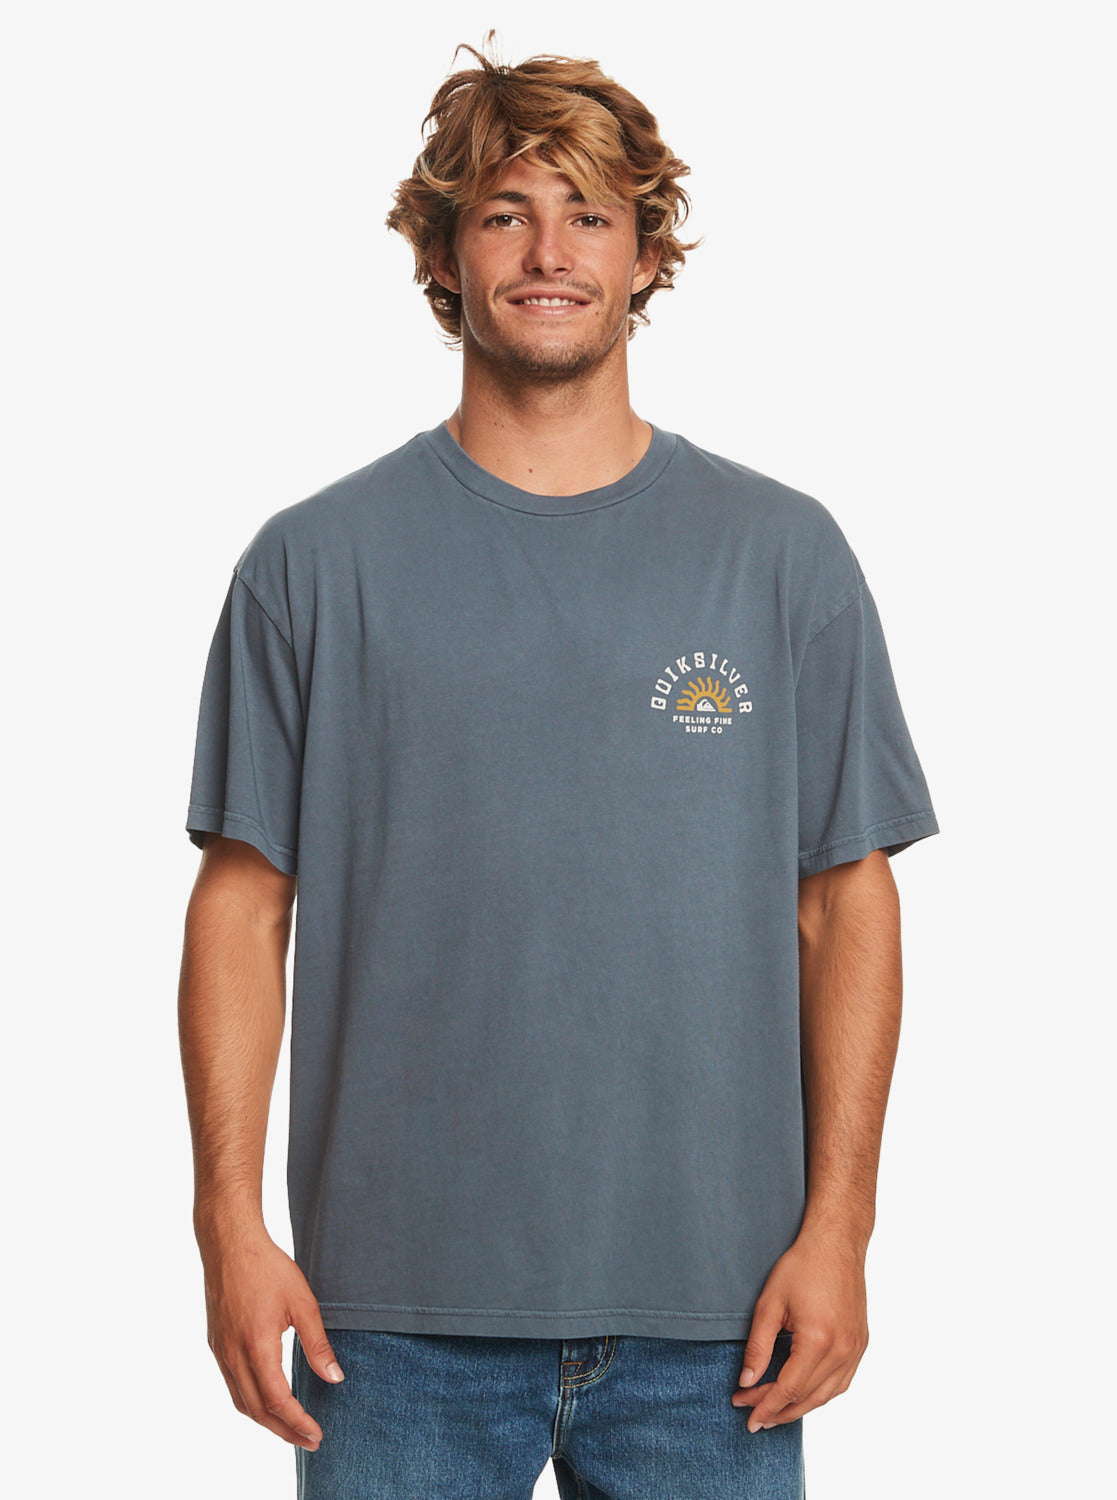 Quiksilver Qs State Of Mind SS Tee - Star Surf + Skate